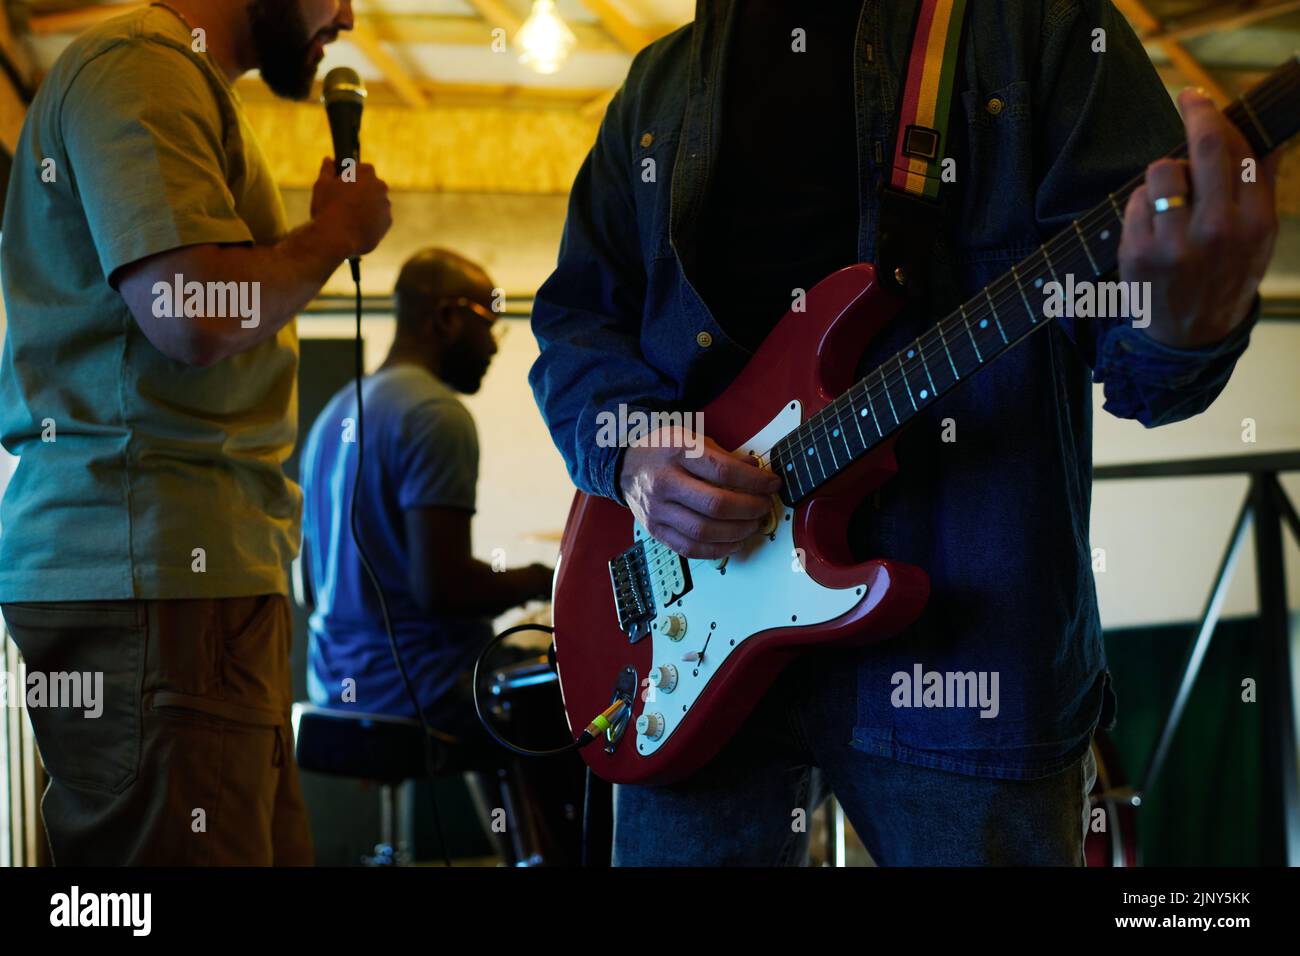 Close-up of young man in denim jacket and blue jeans playing electric guitar against singer with microphone and drummer Stock Photo